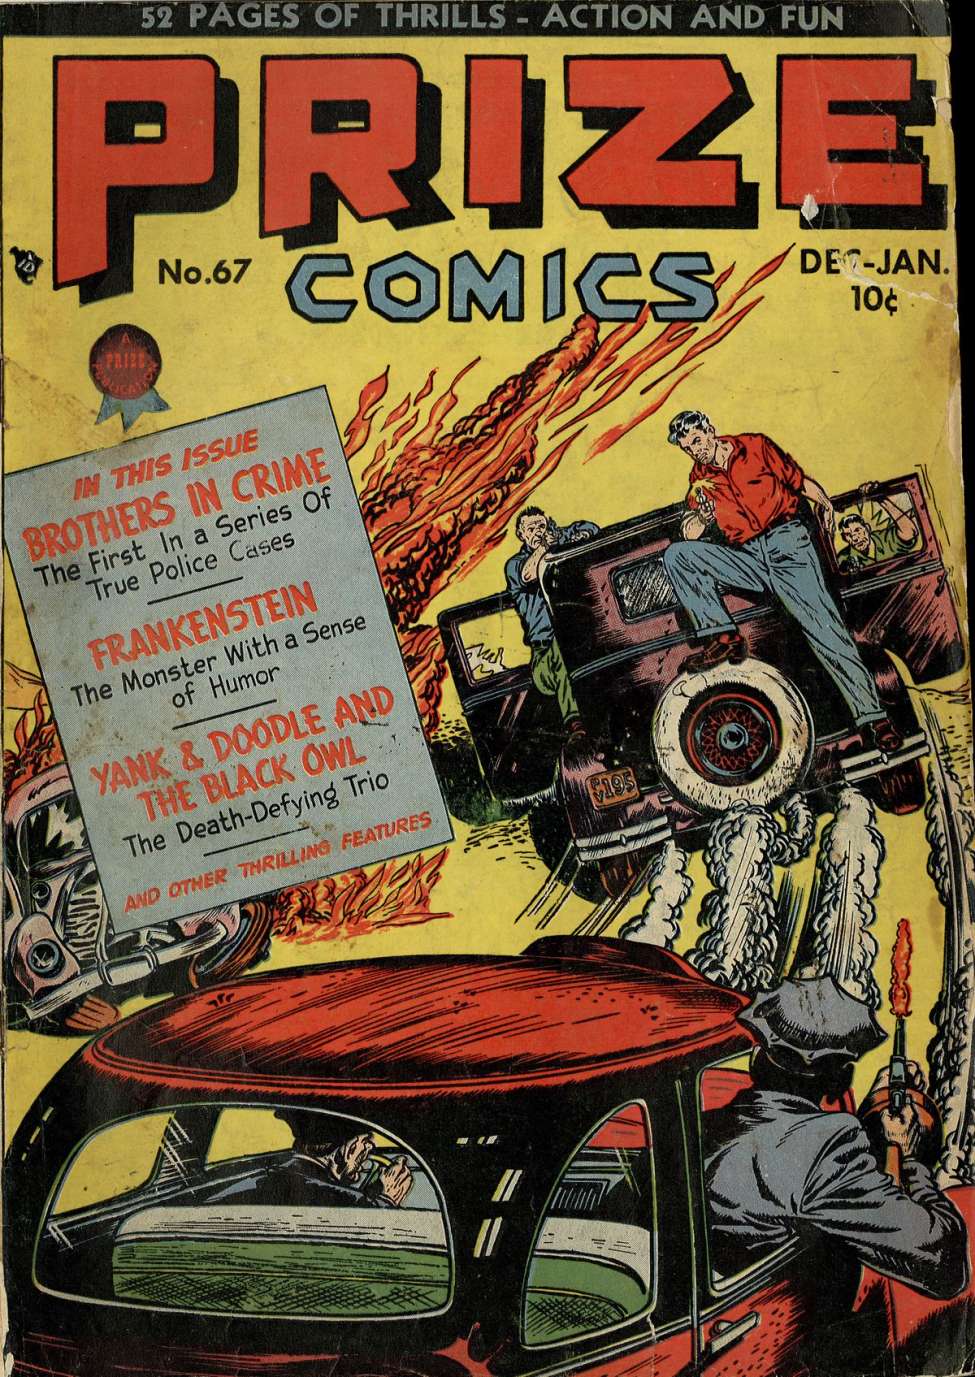 Book Cover For Prize Comics 67